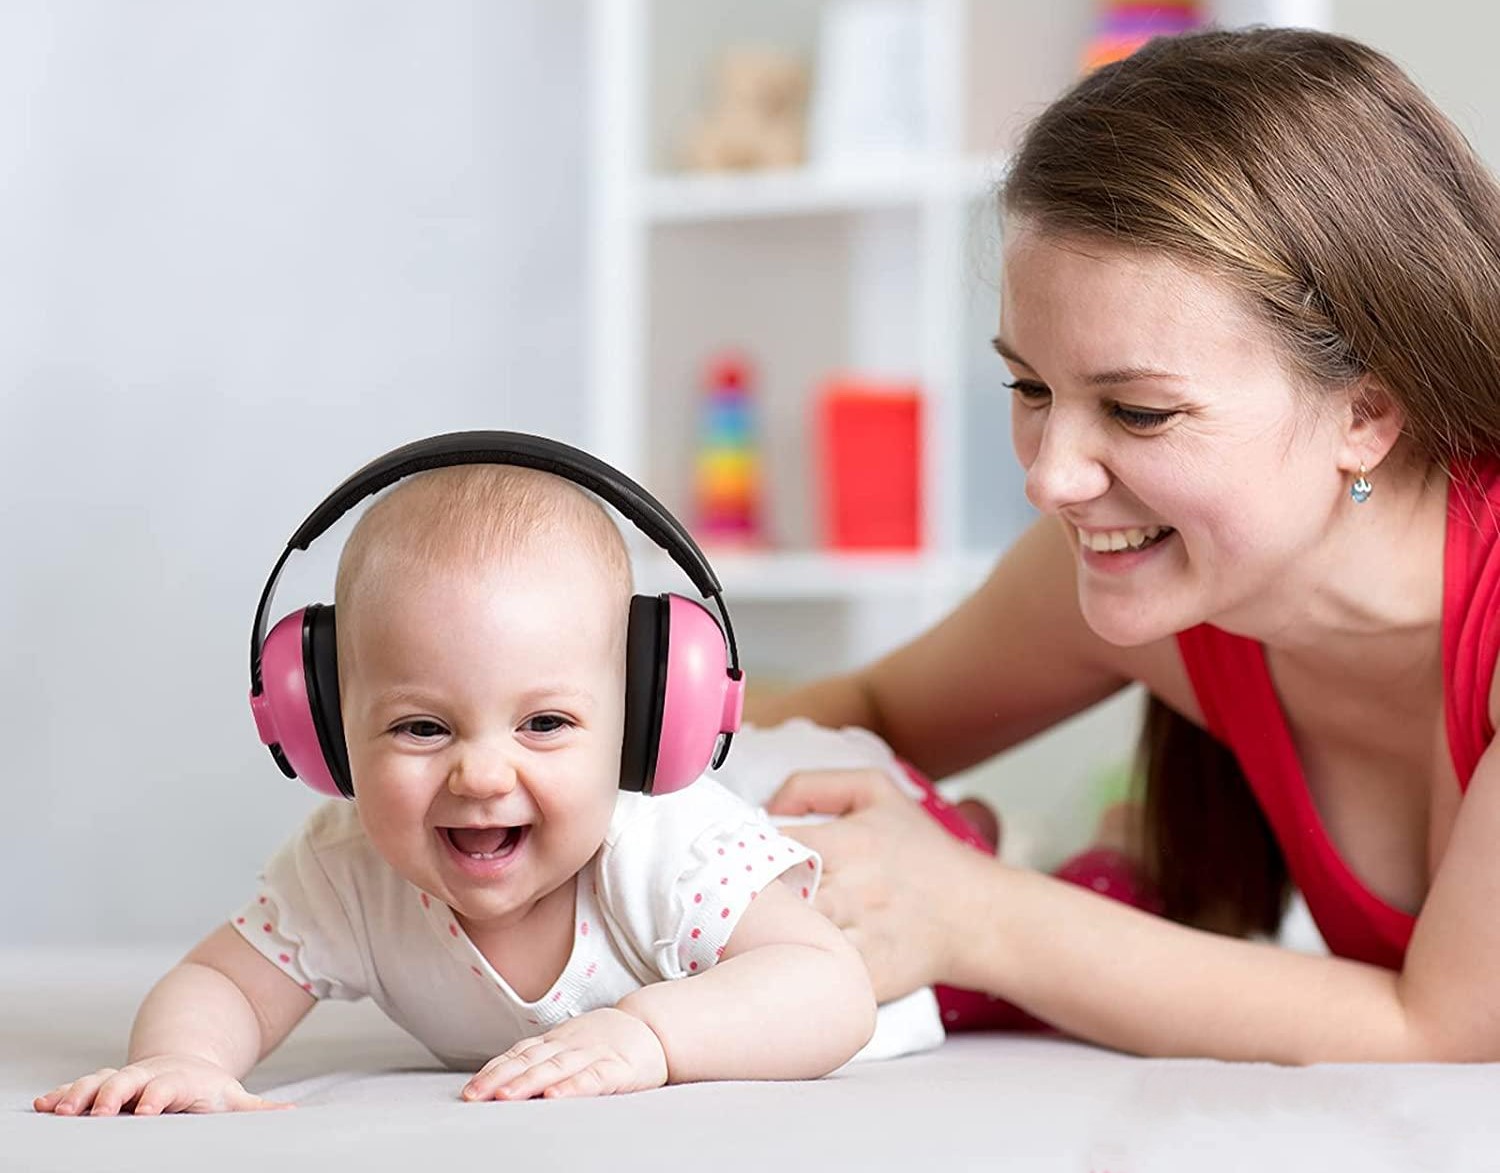 Review of Infant Ear Protection for Noise